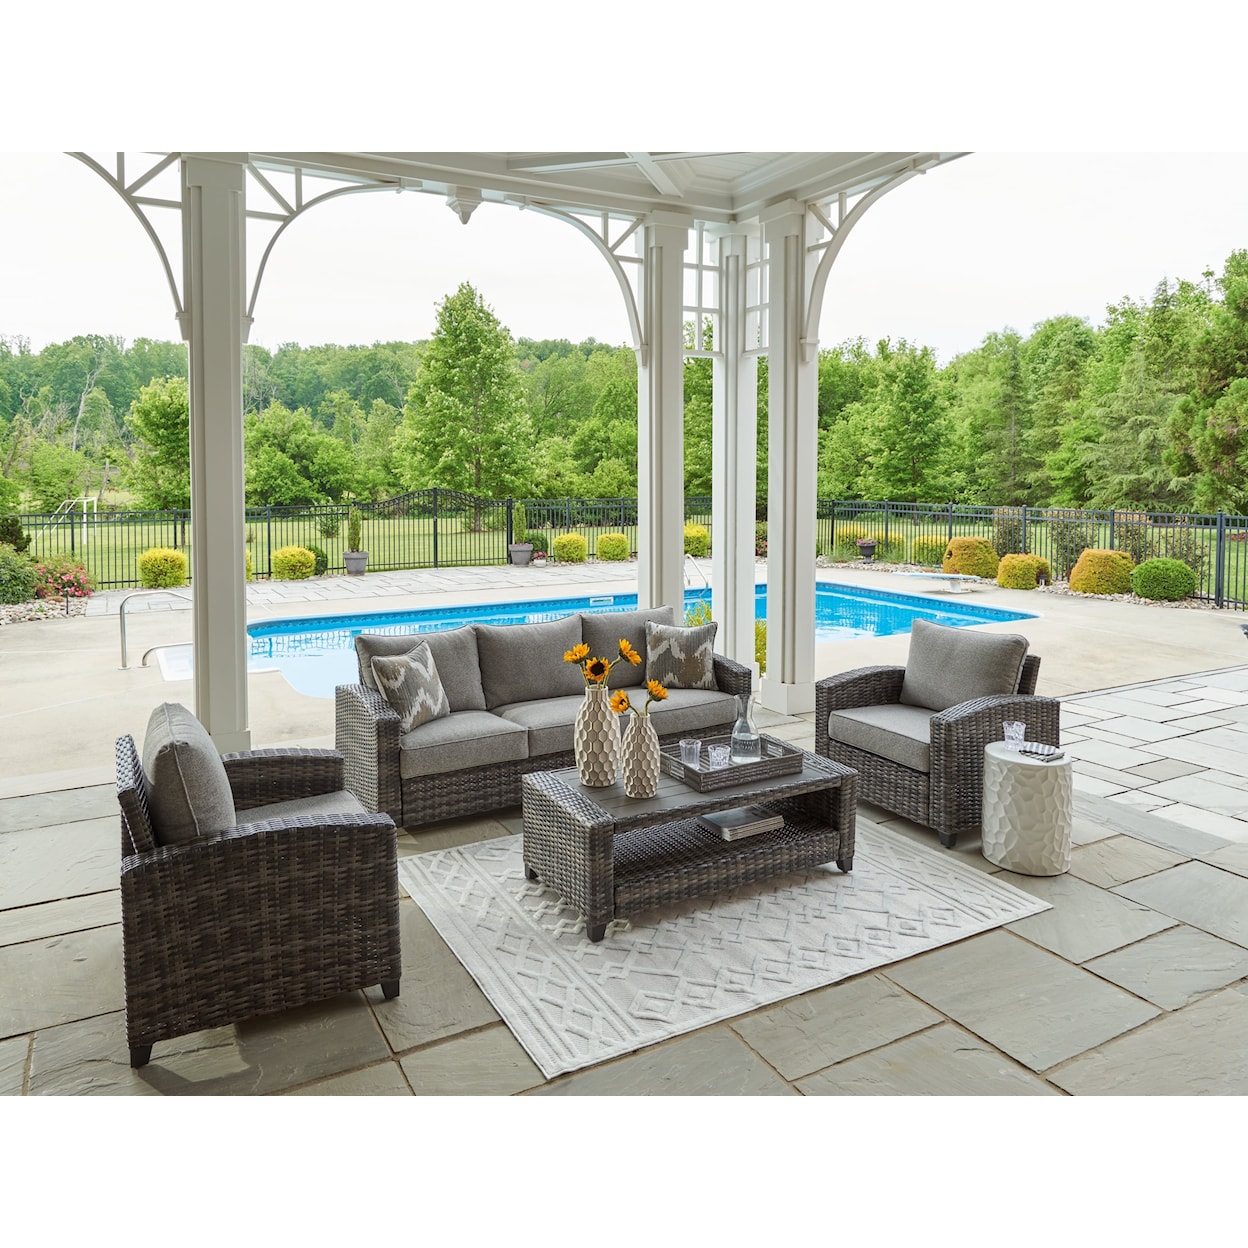 Ashley Furniture Signature Design Oasis Court Outdoor Sofa/Chairs/Table Set (Set of 4)